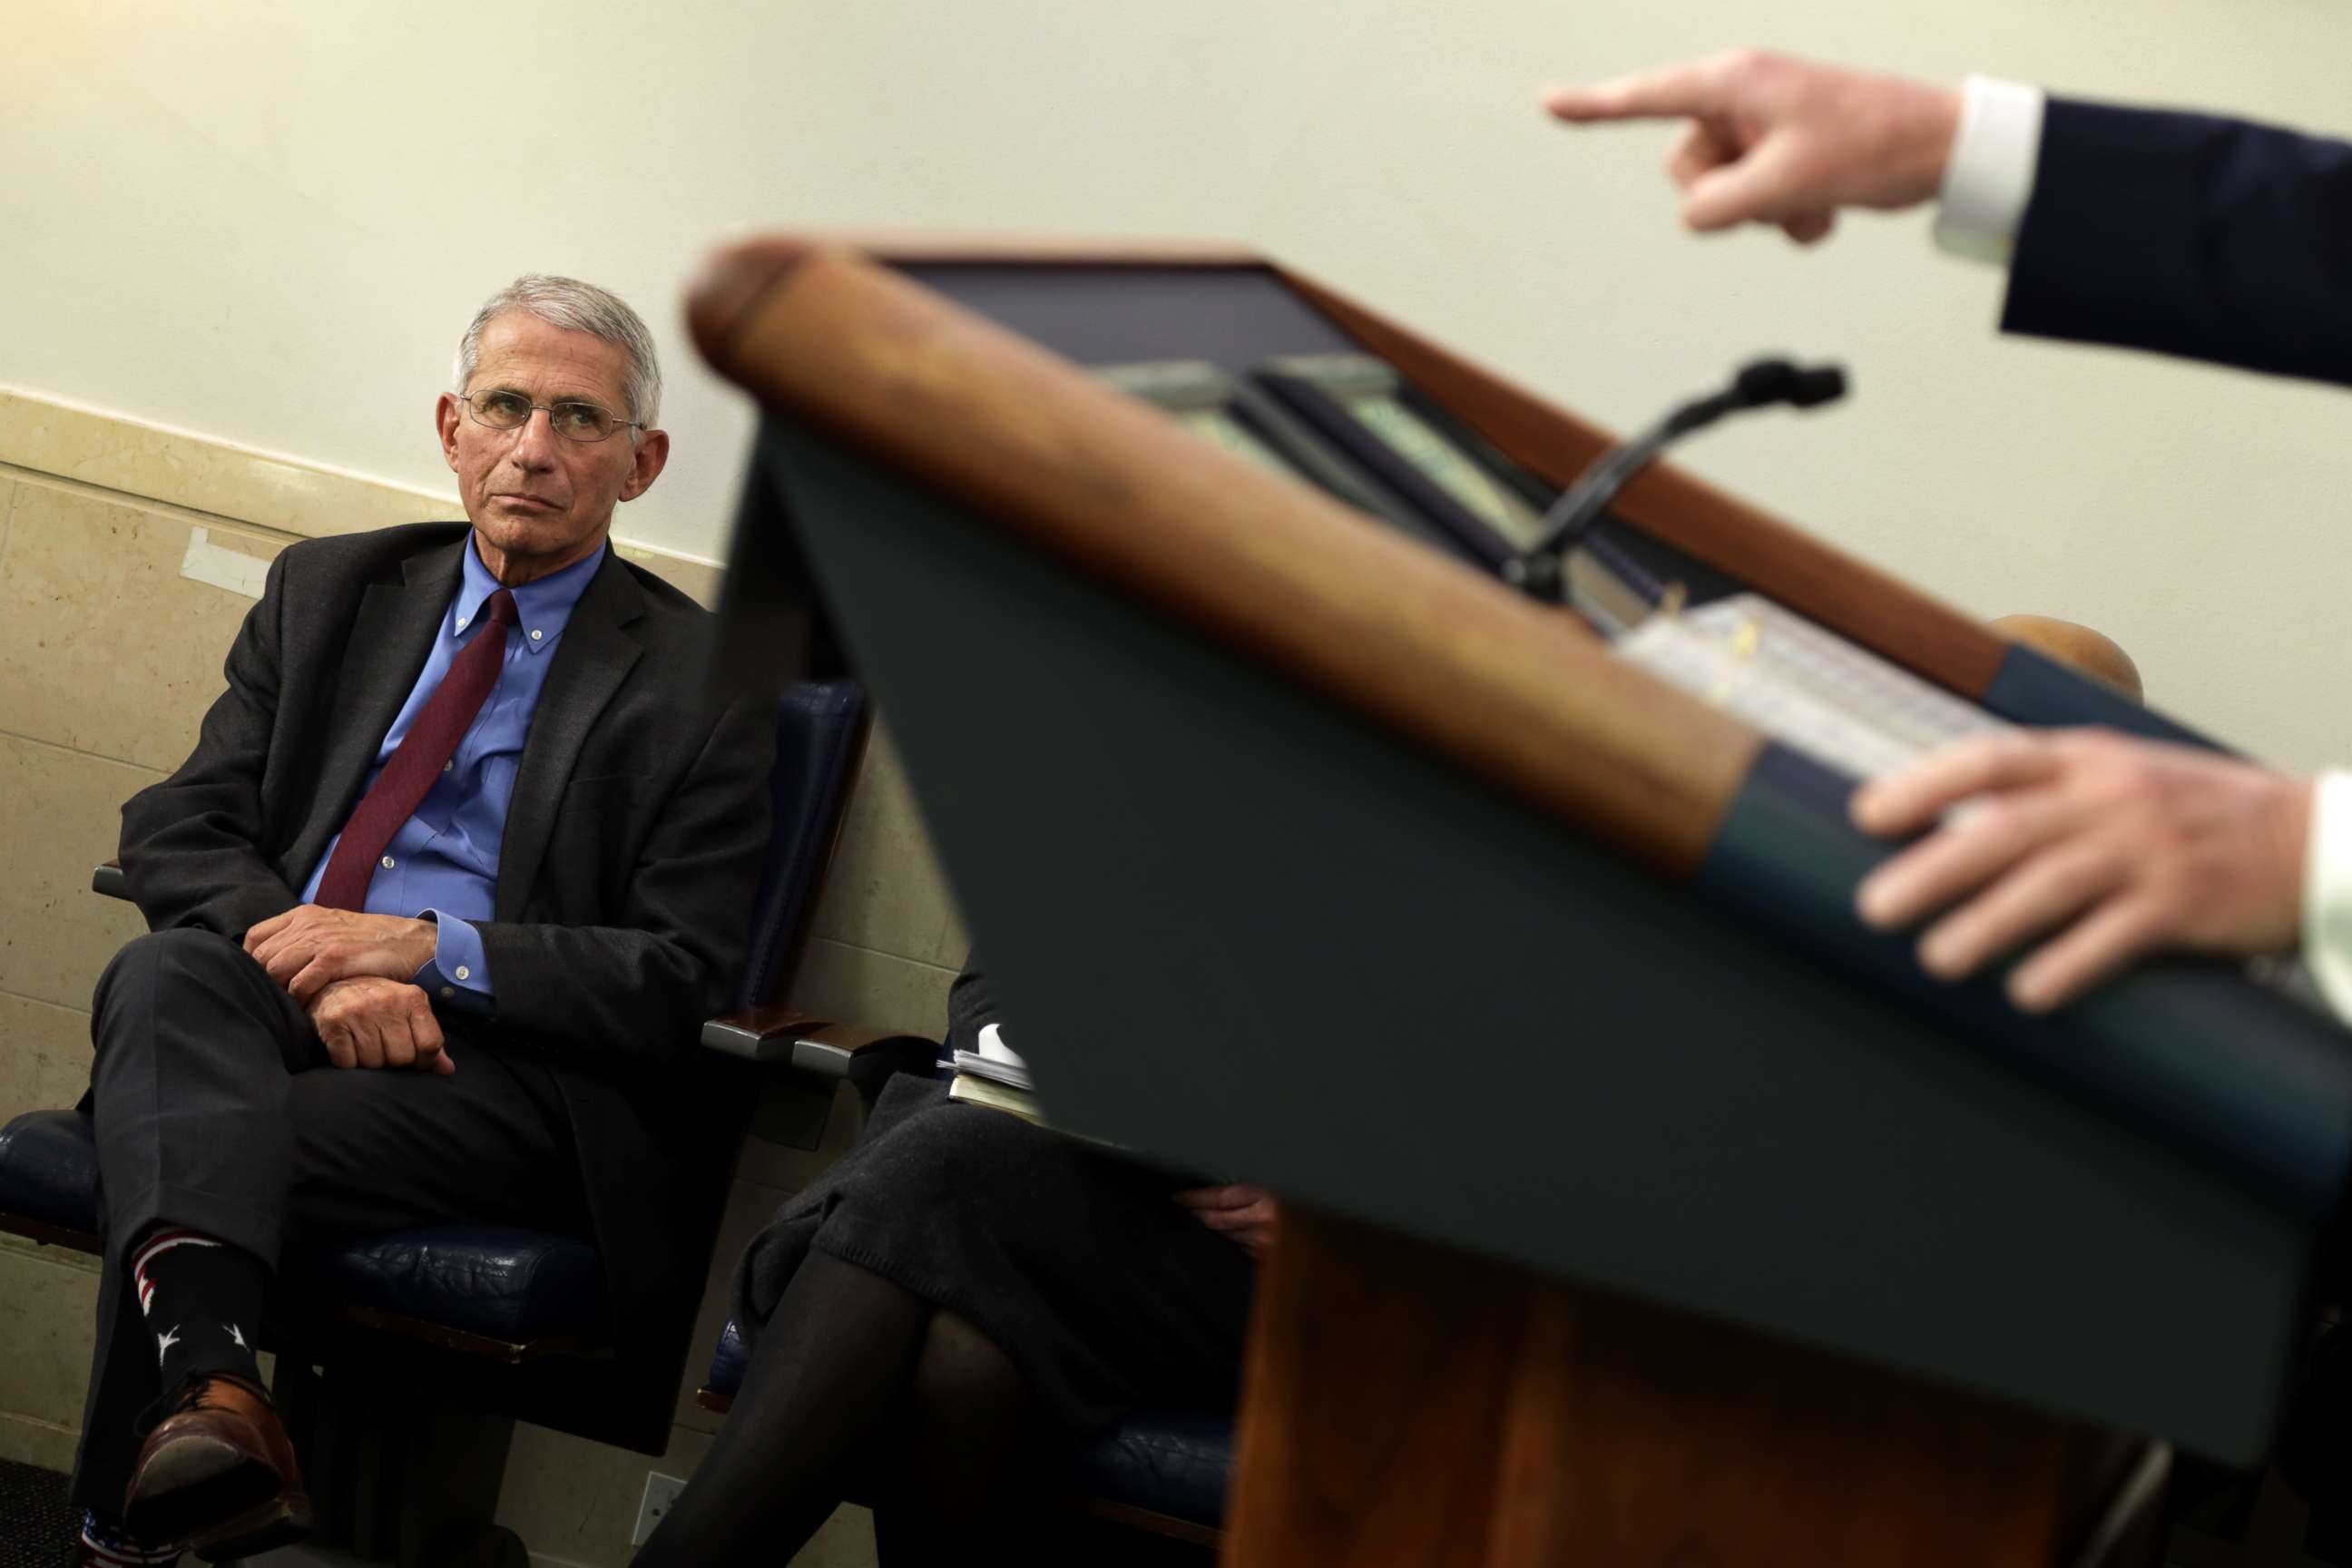 PHOTO: Anthony Fauci watches as President Donald Trump makes a point during the daily briefing of the White House Coronavirus Task Force, April 10, 2020 at the White House in Washington, DC.